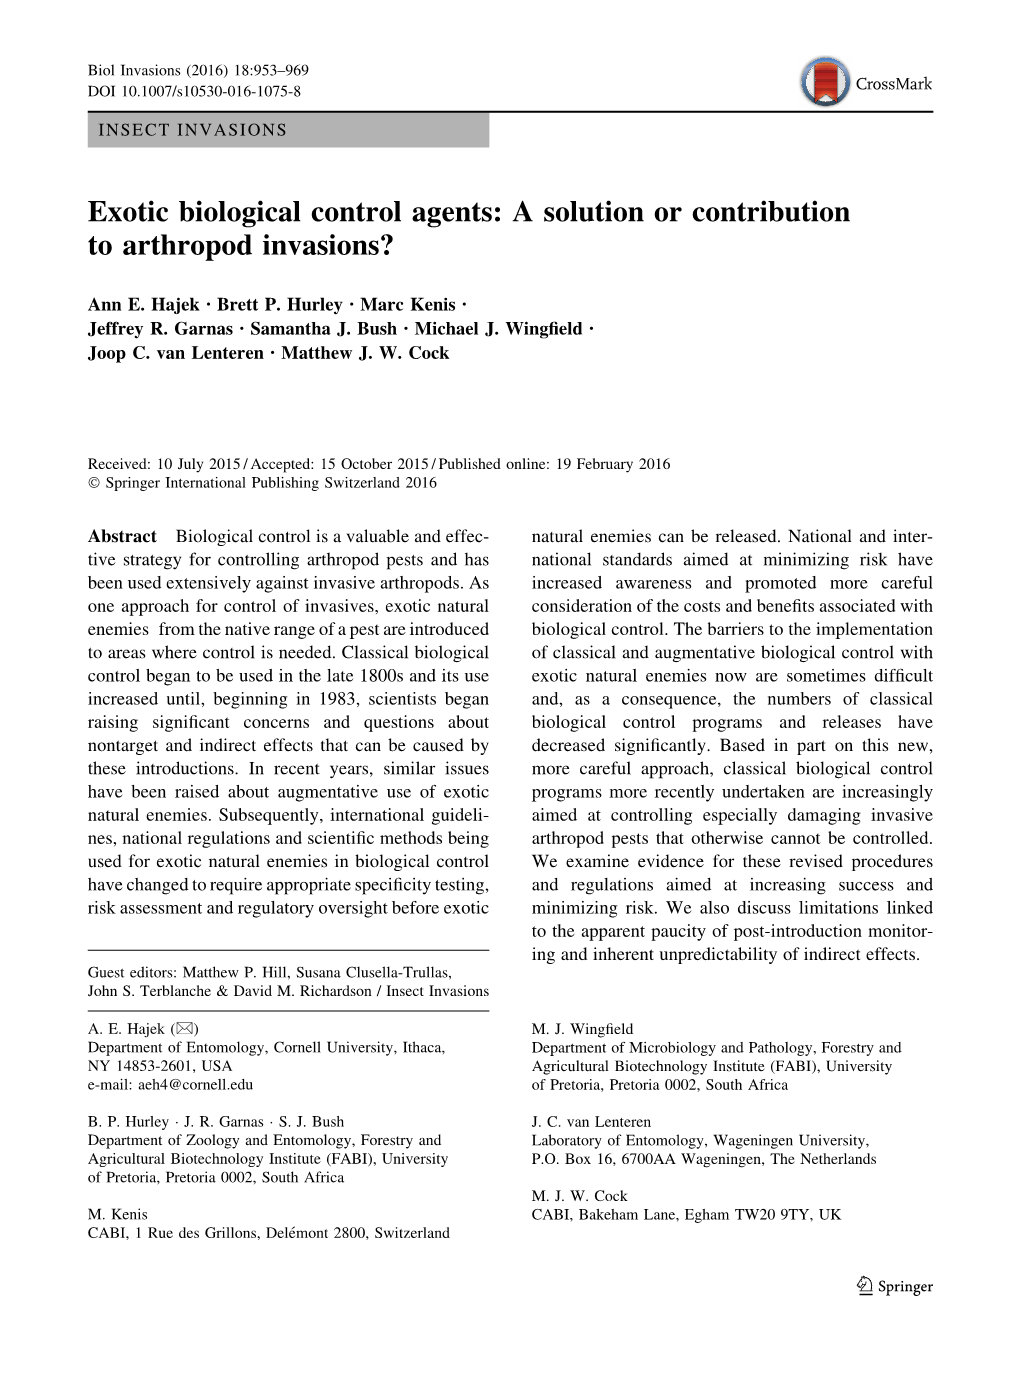 Exotic Biological Control Agents: a Solution Or Contribution to Arthropod Invasions?